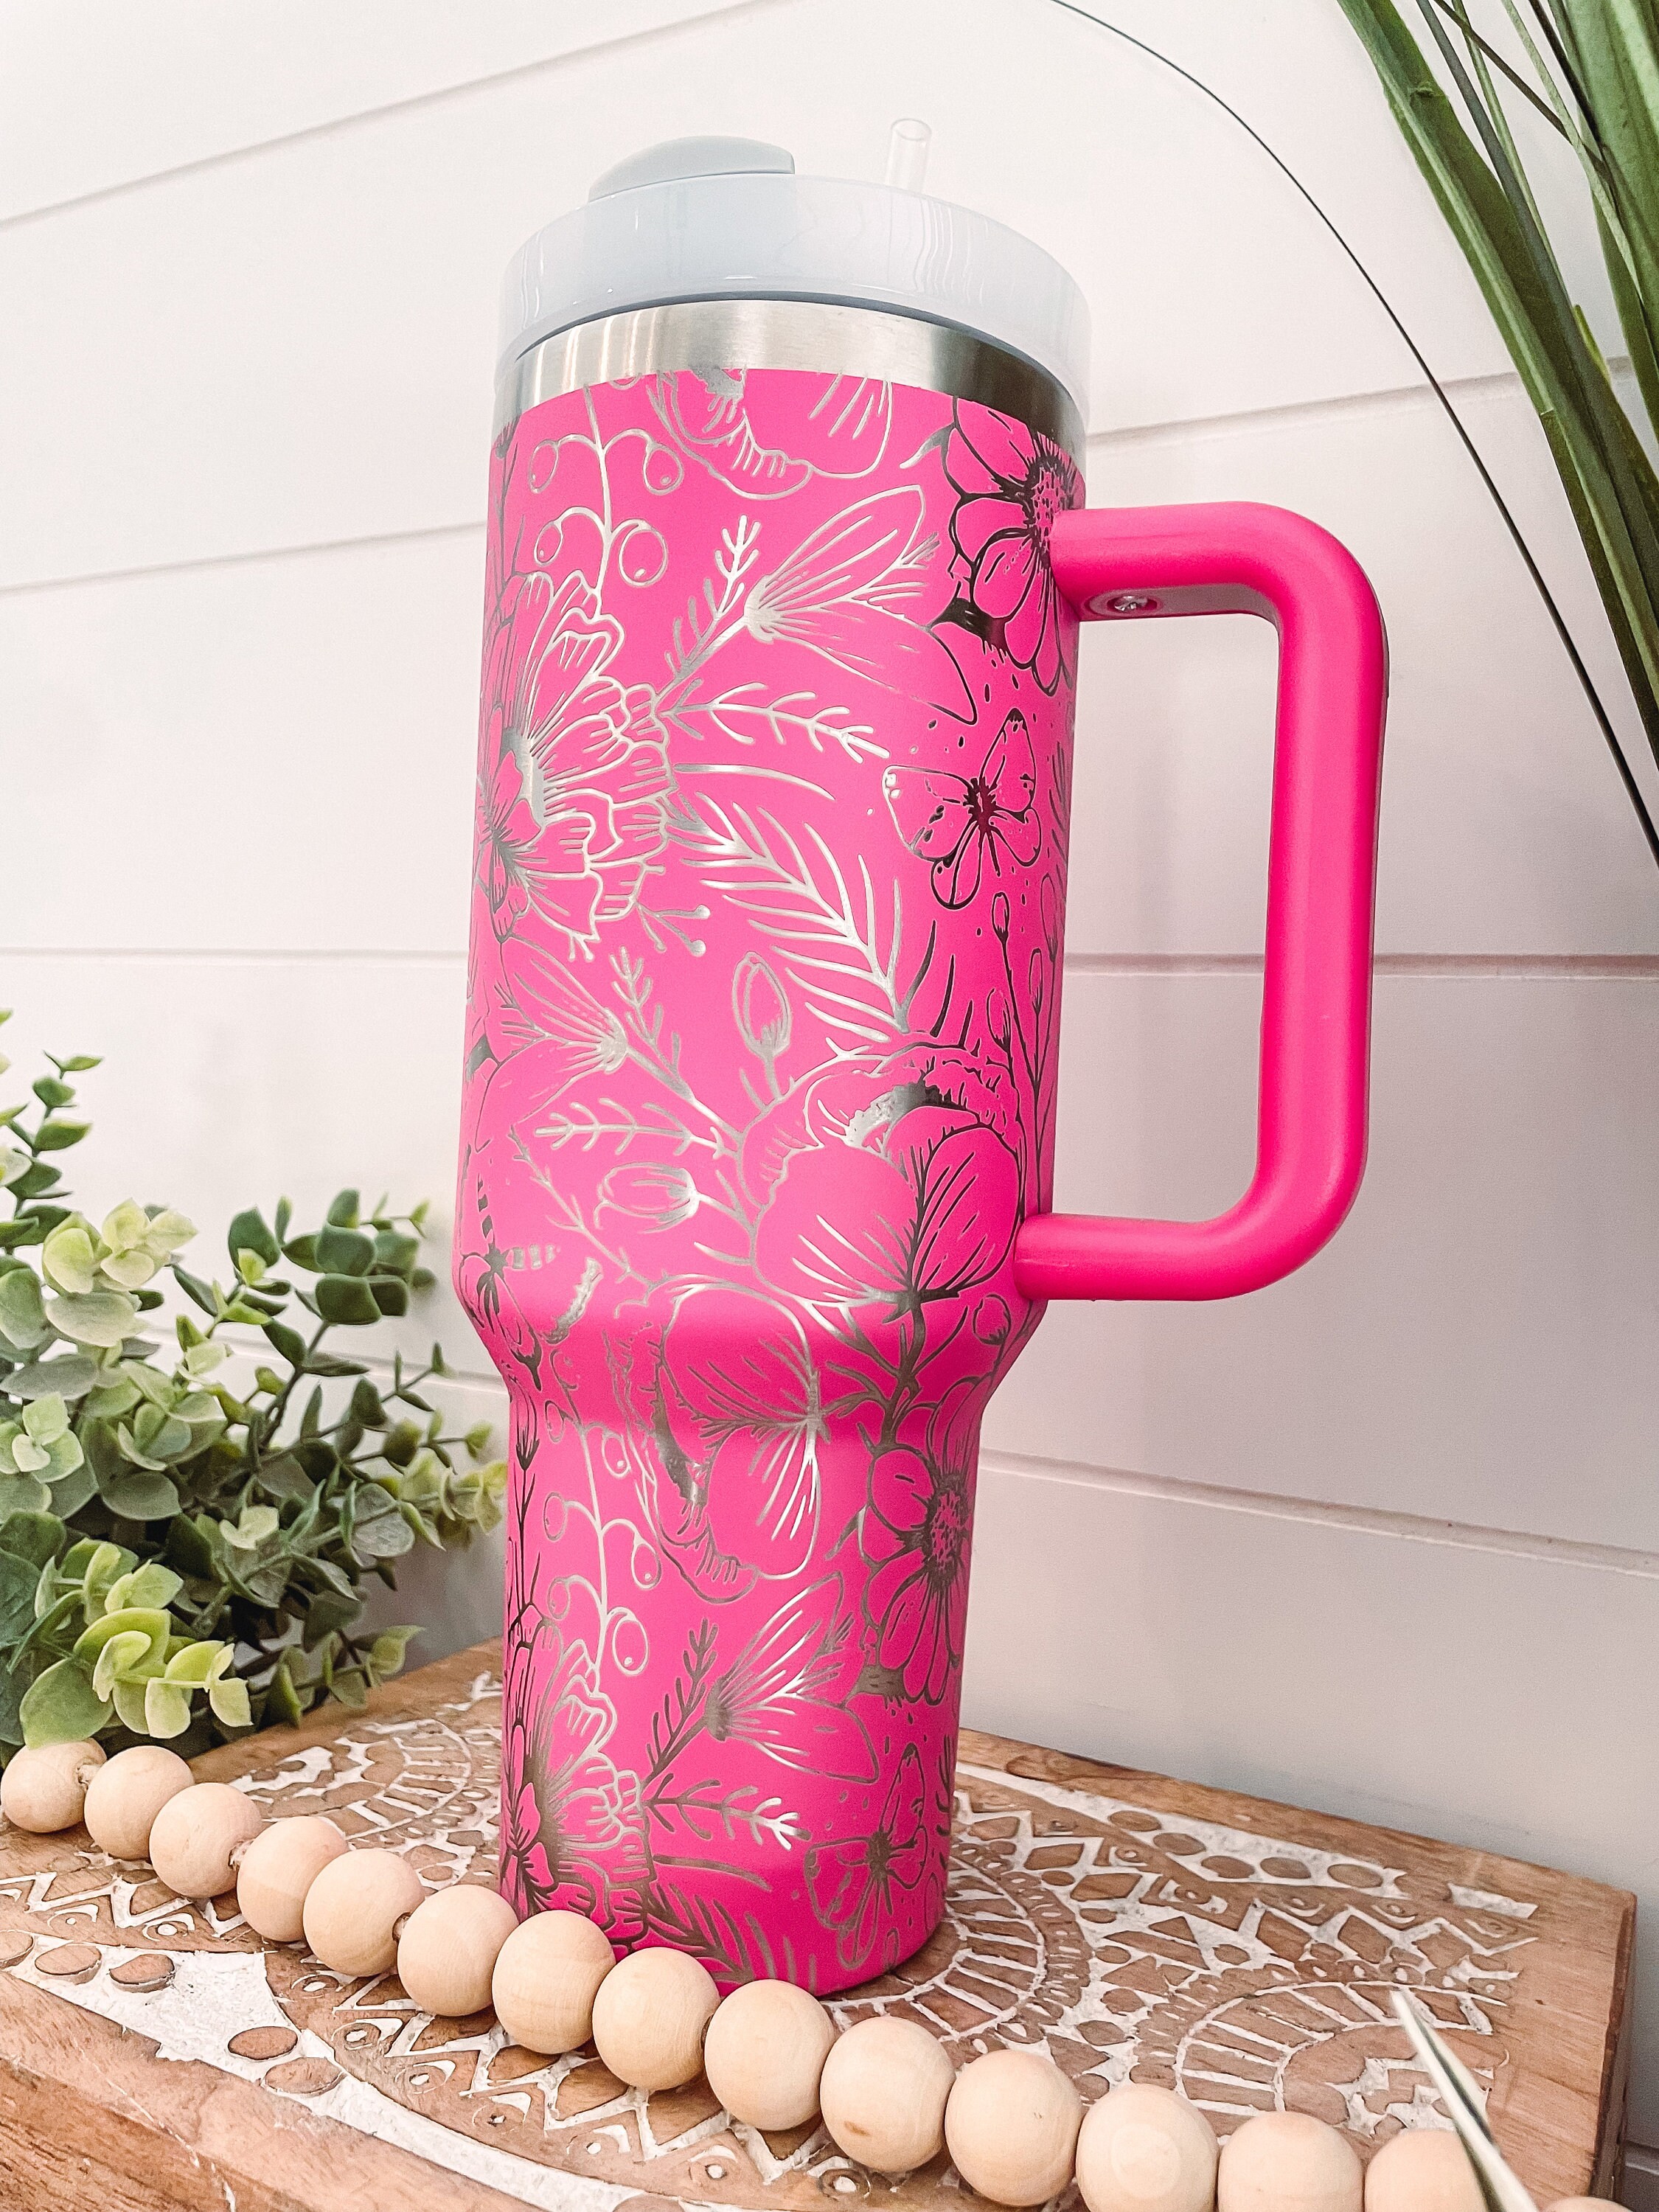 Floral Tumbler with Lid and Straw, Floral Travel Mug, Floral Mugs for  Women, Cute Tumblers for Women…See more Floral Tumbler with Lid and Straw